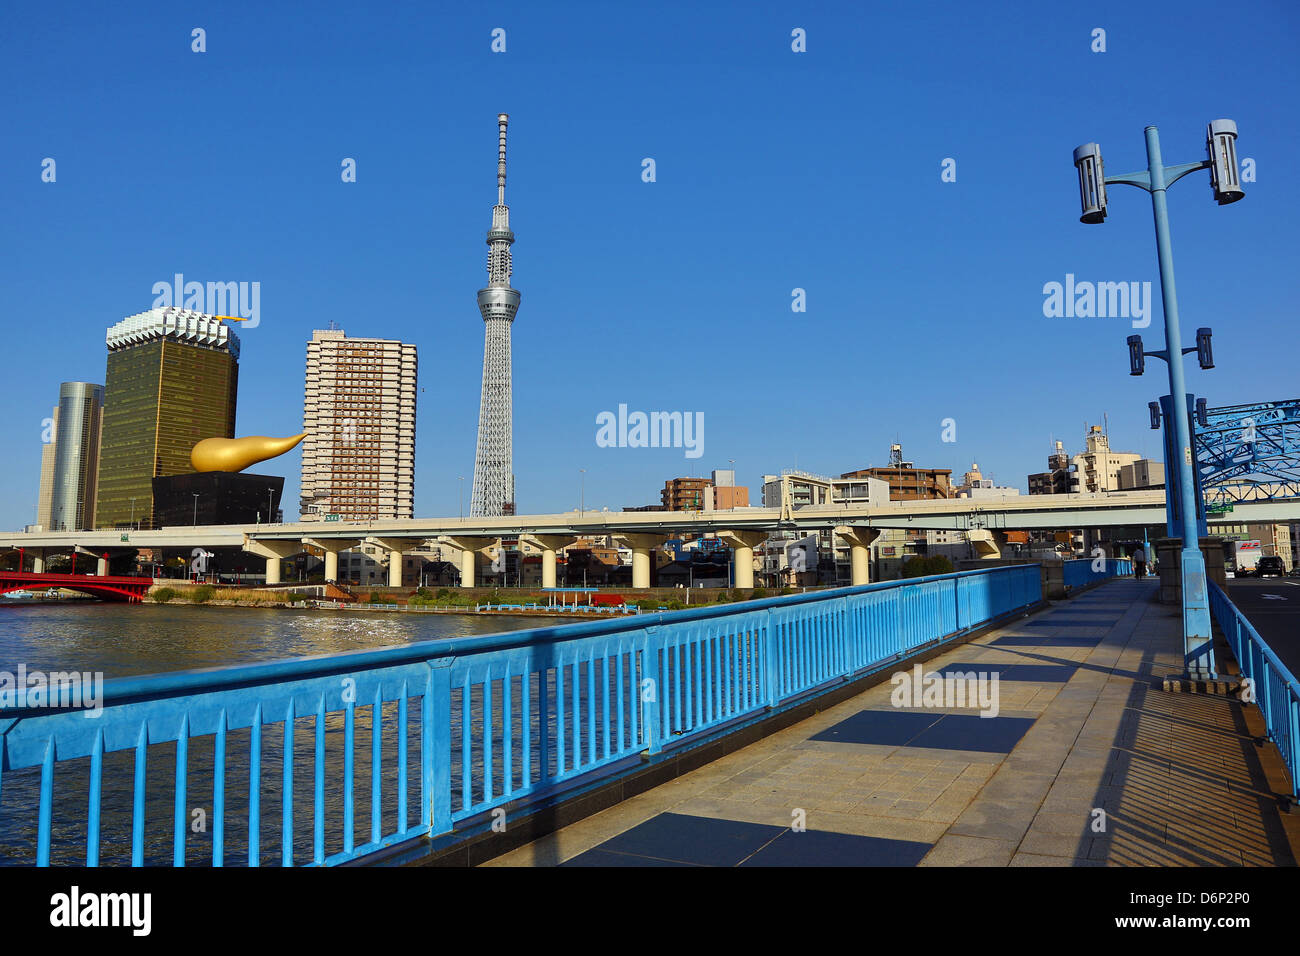 General view of the city skyline of Asakusa with the Tokyo Skytree Tower and the Asahi Beer Headquarters and gold flame building Stock Photo